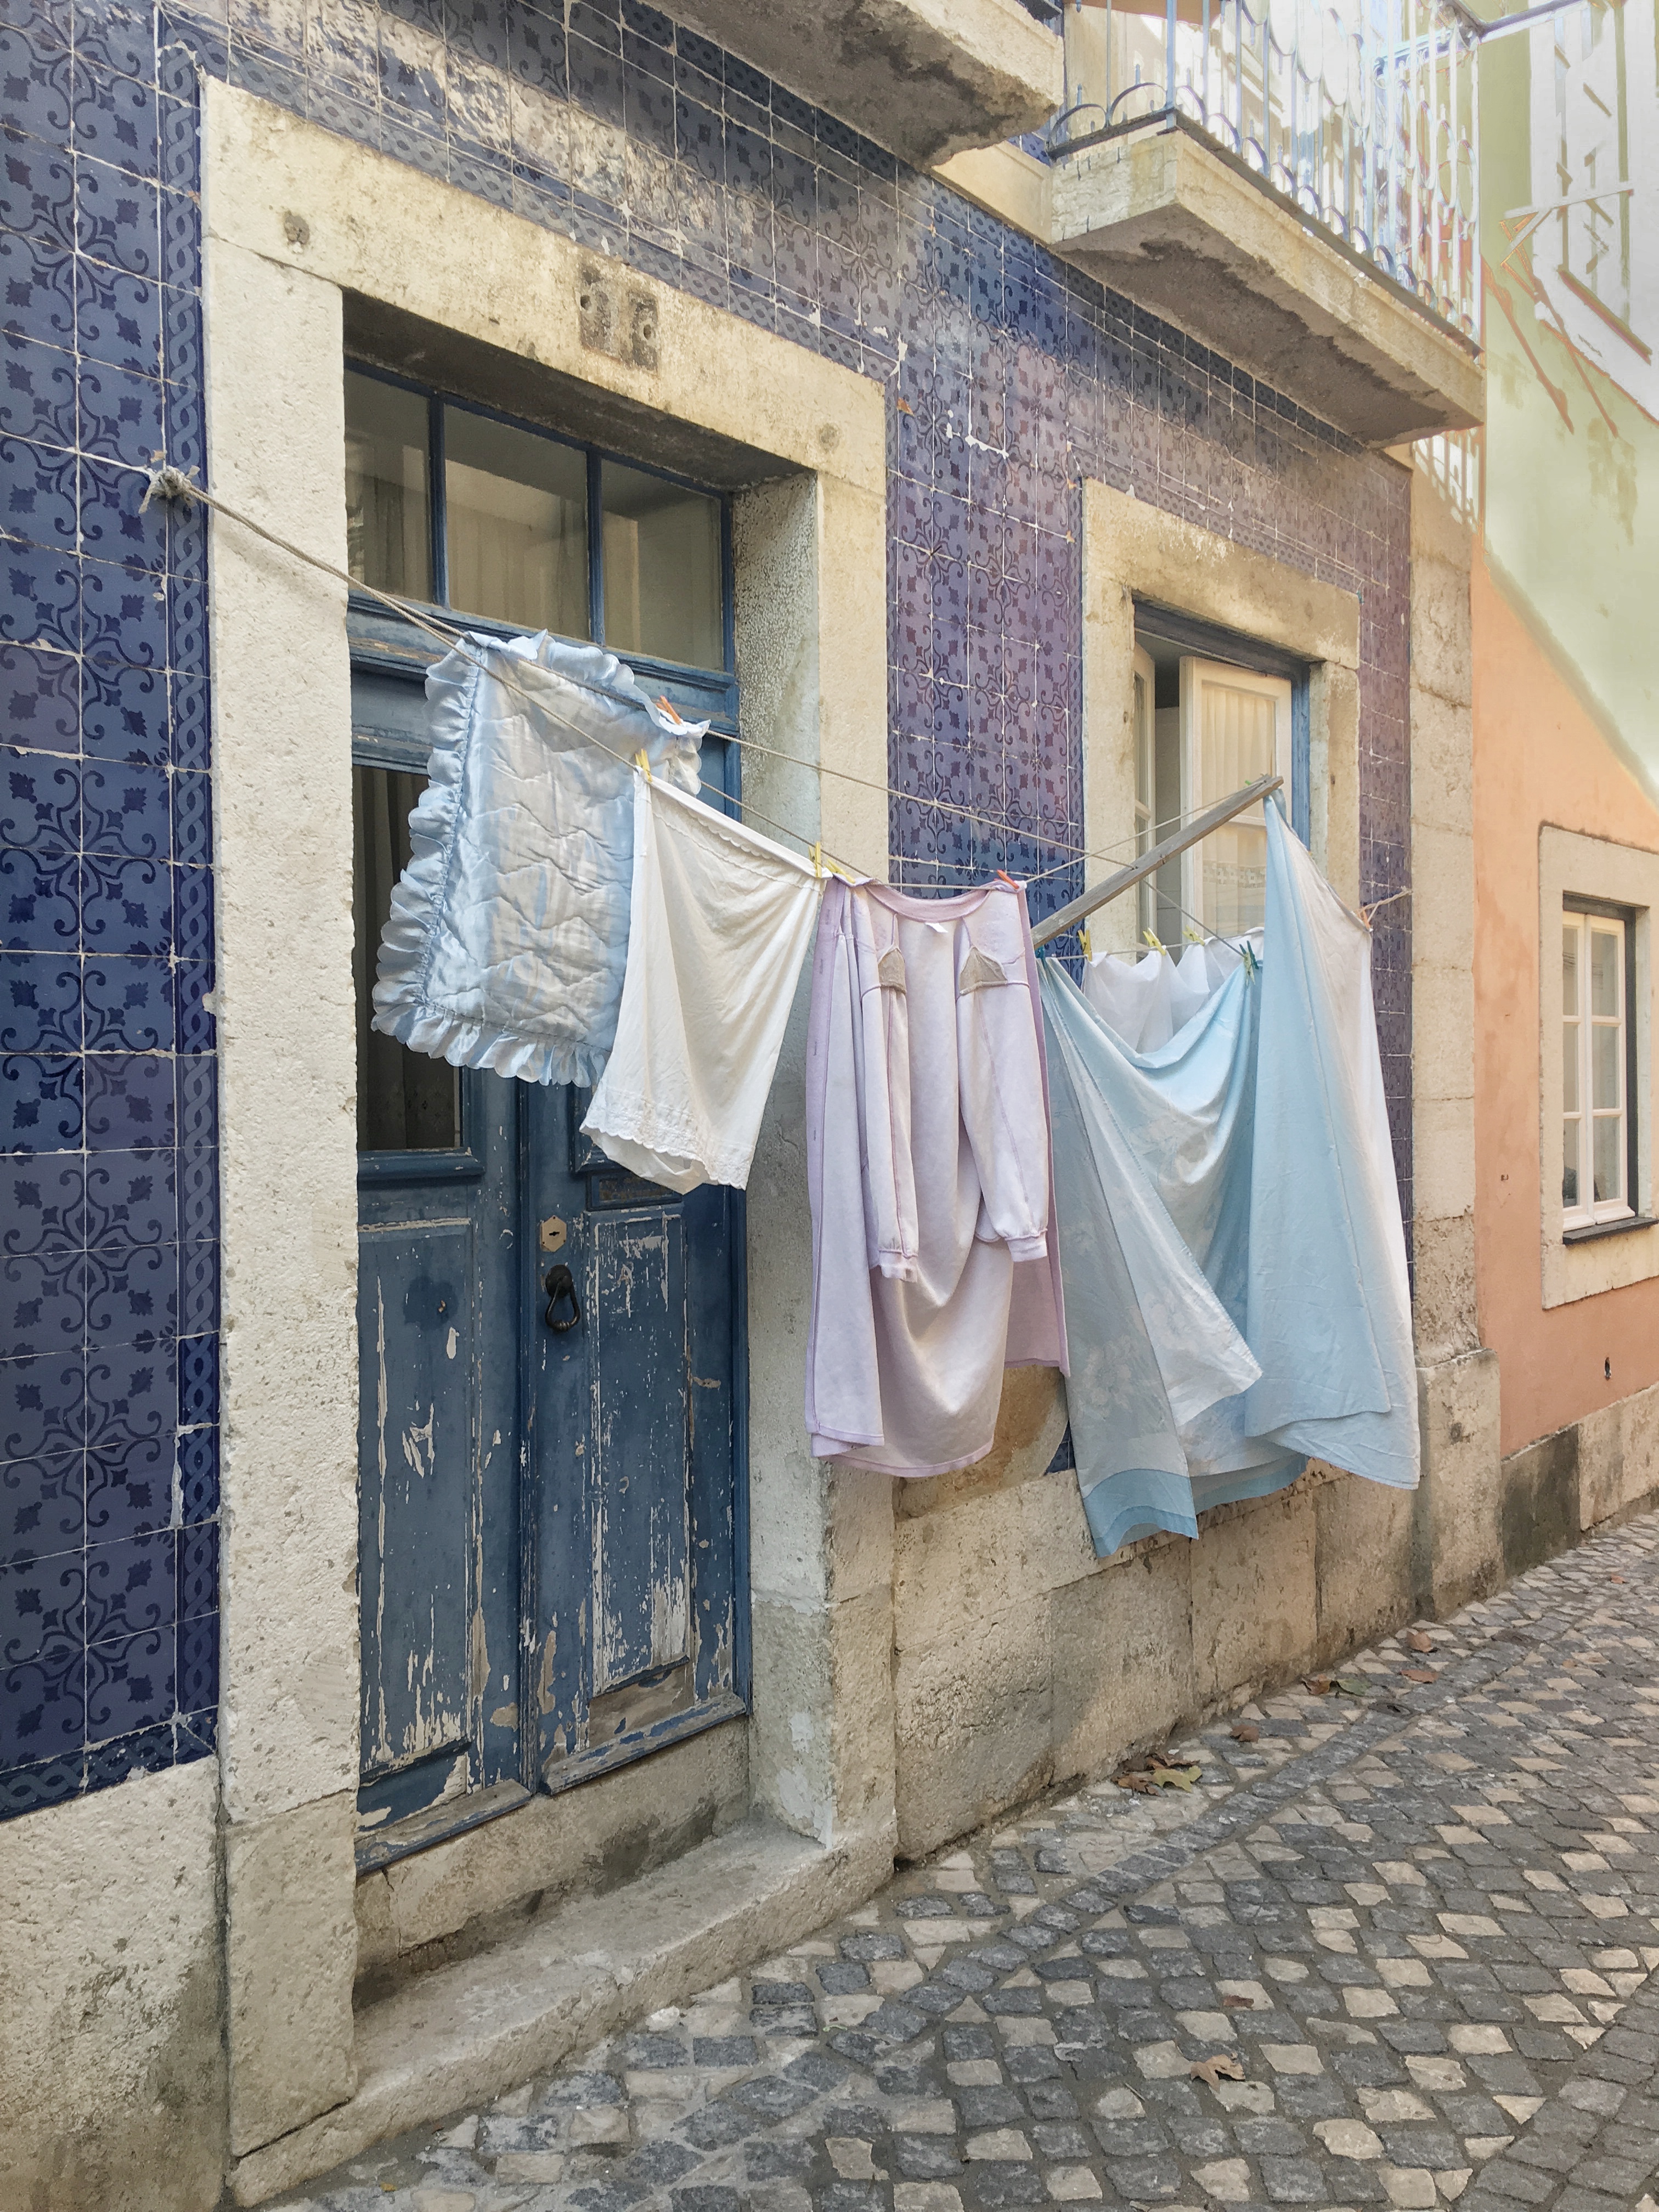 Hanging laundry in Alfama dstrict